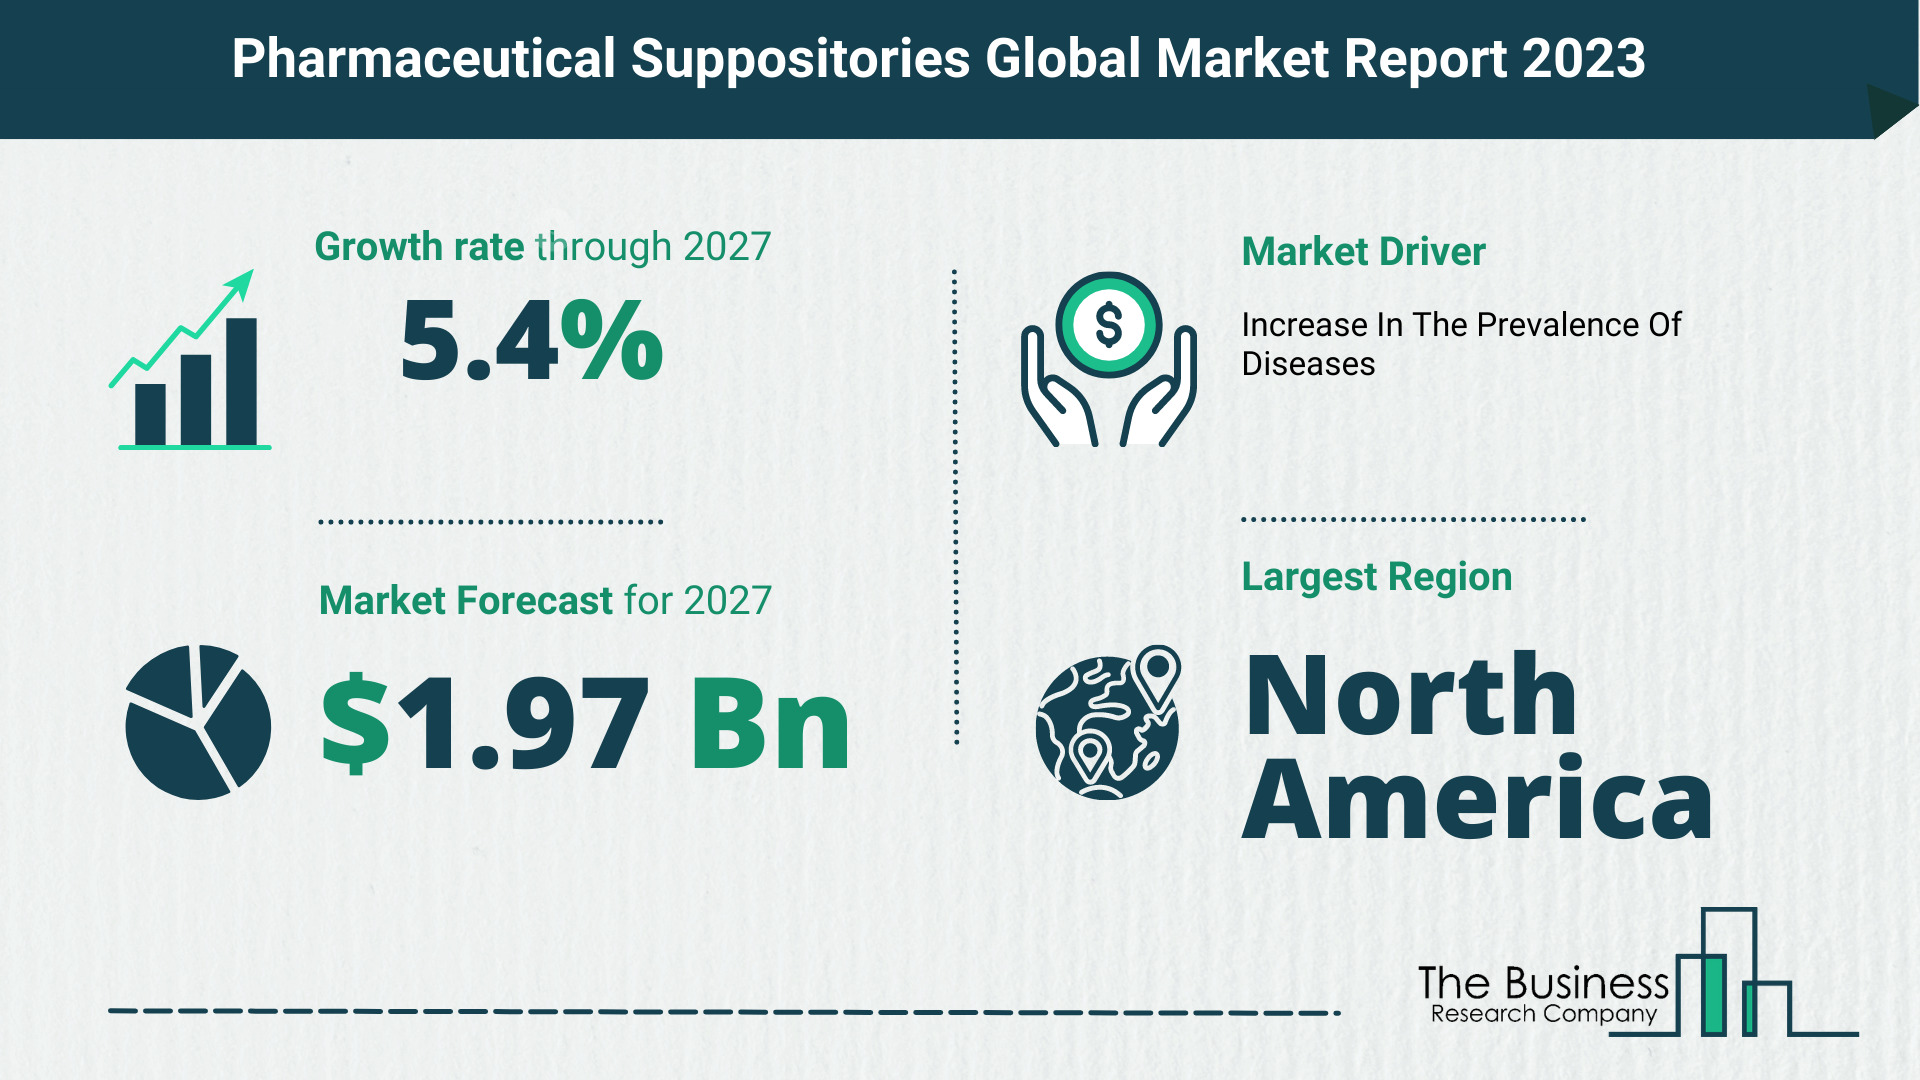 What Will The Pharmaceutical Suppositories Market Look Like In 2023?